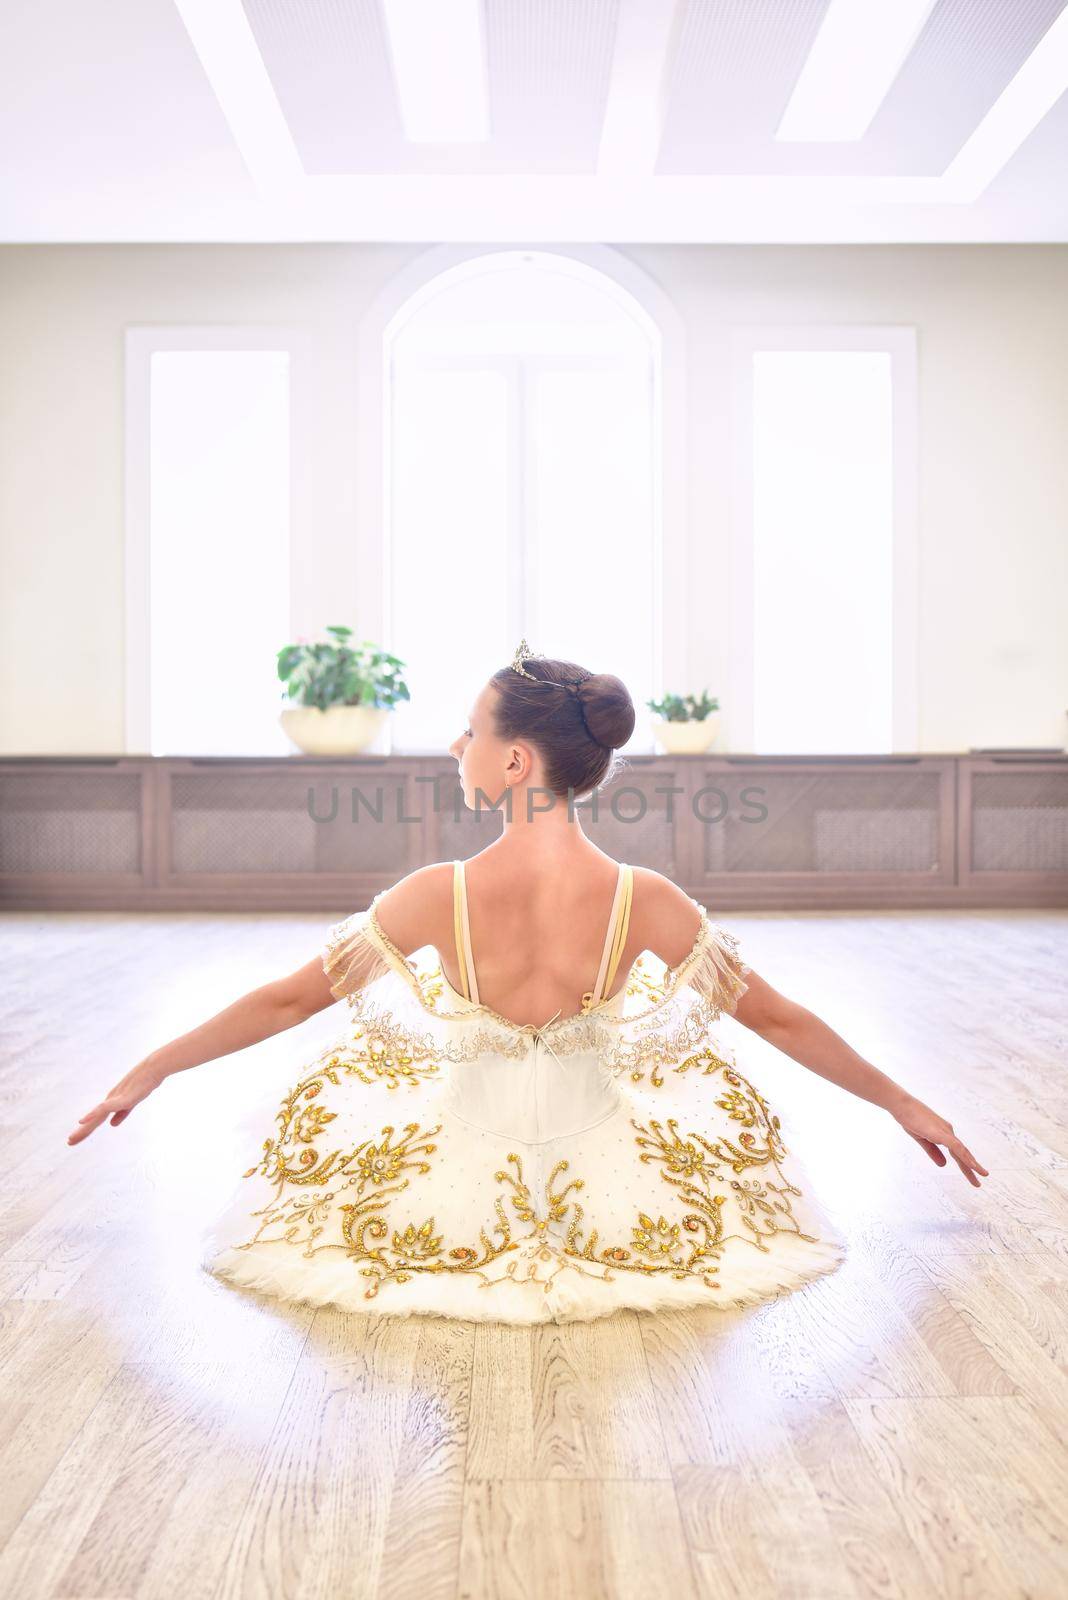 Back view of beautiful young ballet dancer in cream dress sitting and warms up her hands on wooden floor in ballet studio